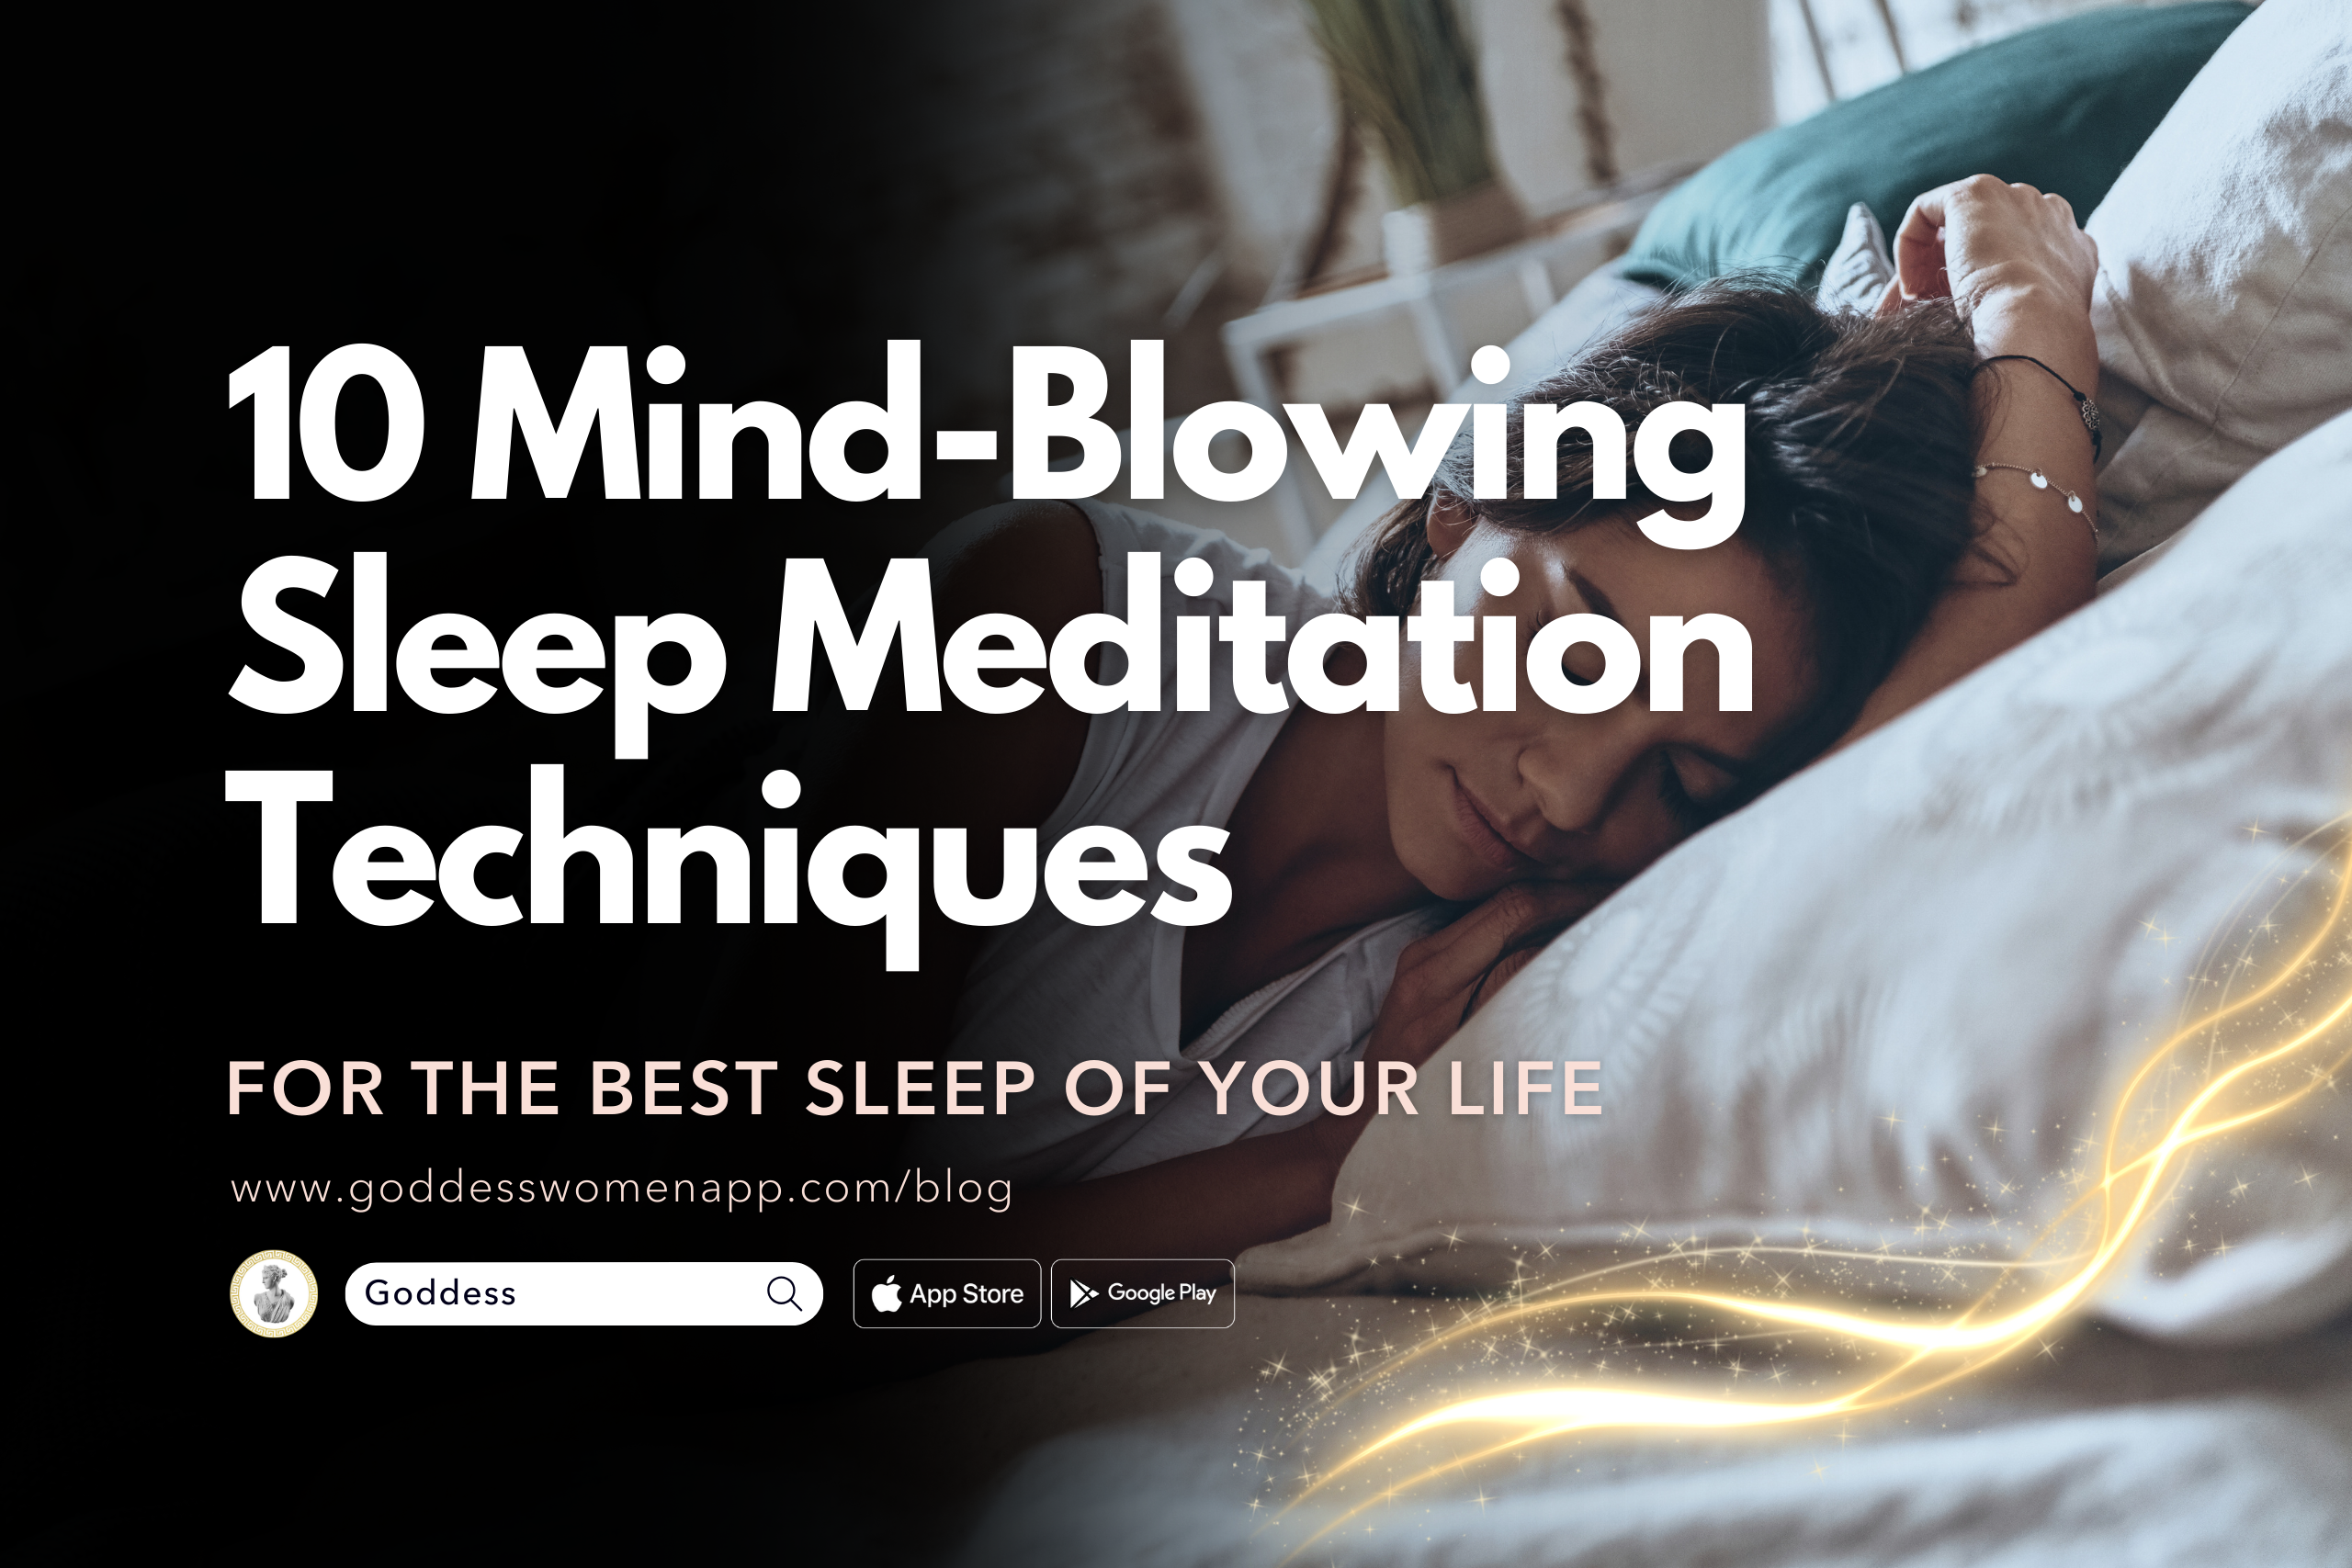 10 Mind-Blowing Sleep Meditation Techniques for the Best Sleep of Your Life